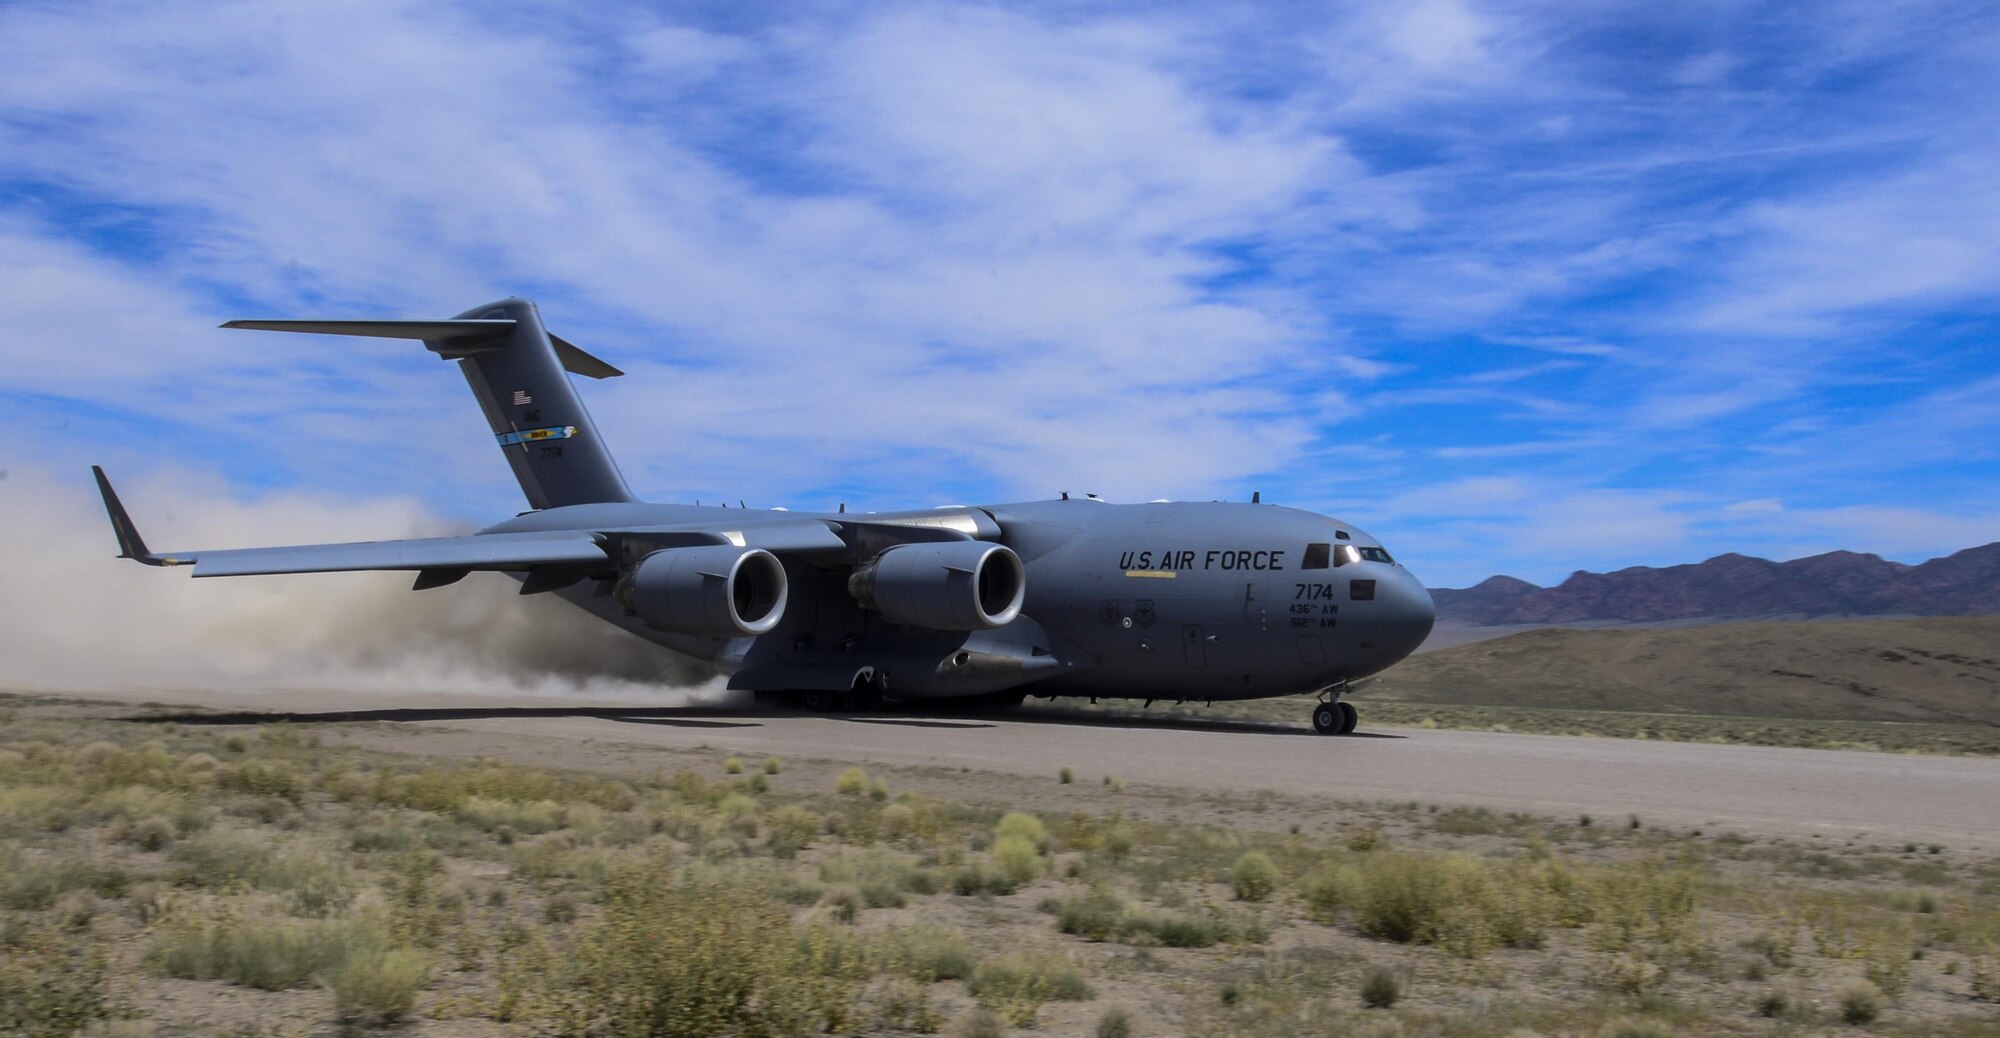 A C-17 Globemaster III, assigned to the 17th Weapons Squadron, Nellis Air Force Base, Nevada, lands on an airstrip in the Nevada Test and Training Range during Joint Forcible Entry Exercise, June 16, 2016. JFEX is a U.S. Air Force Weapons School large-scale air mobility exercise in which participants plan and execute a complex air-land operation in a simulated contested battlefield. (U.S. Air Force photo by Airman 1st Class Kevin Tanenbaum)